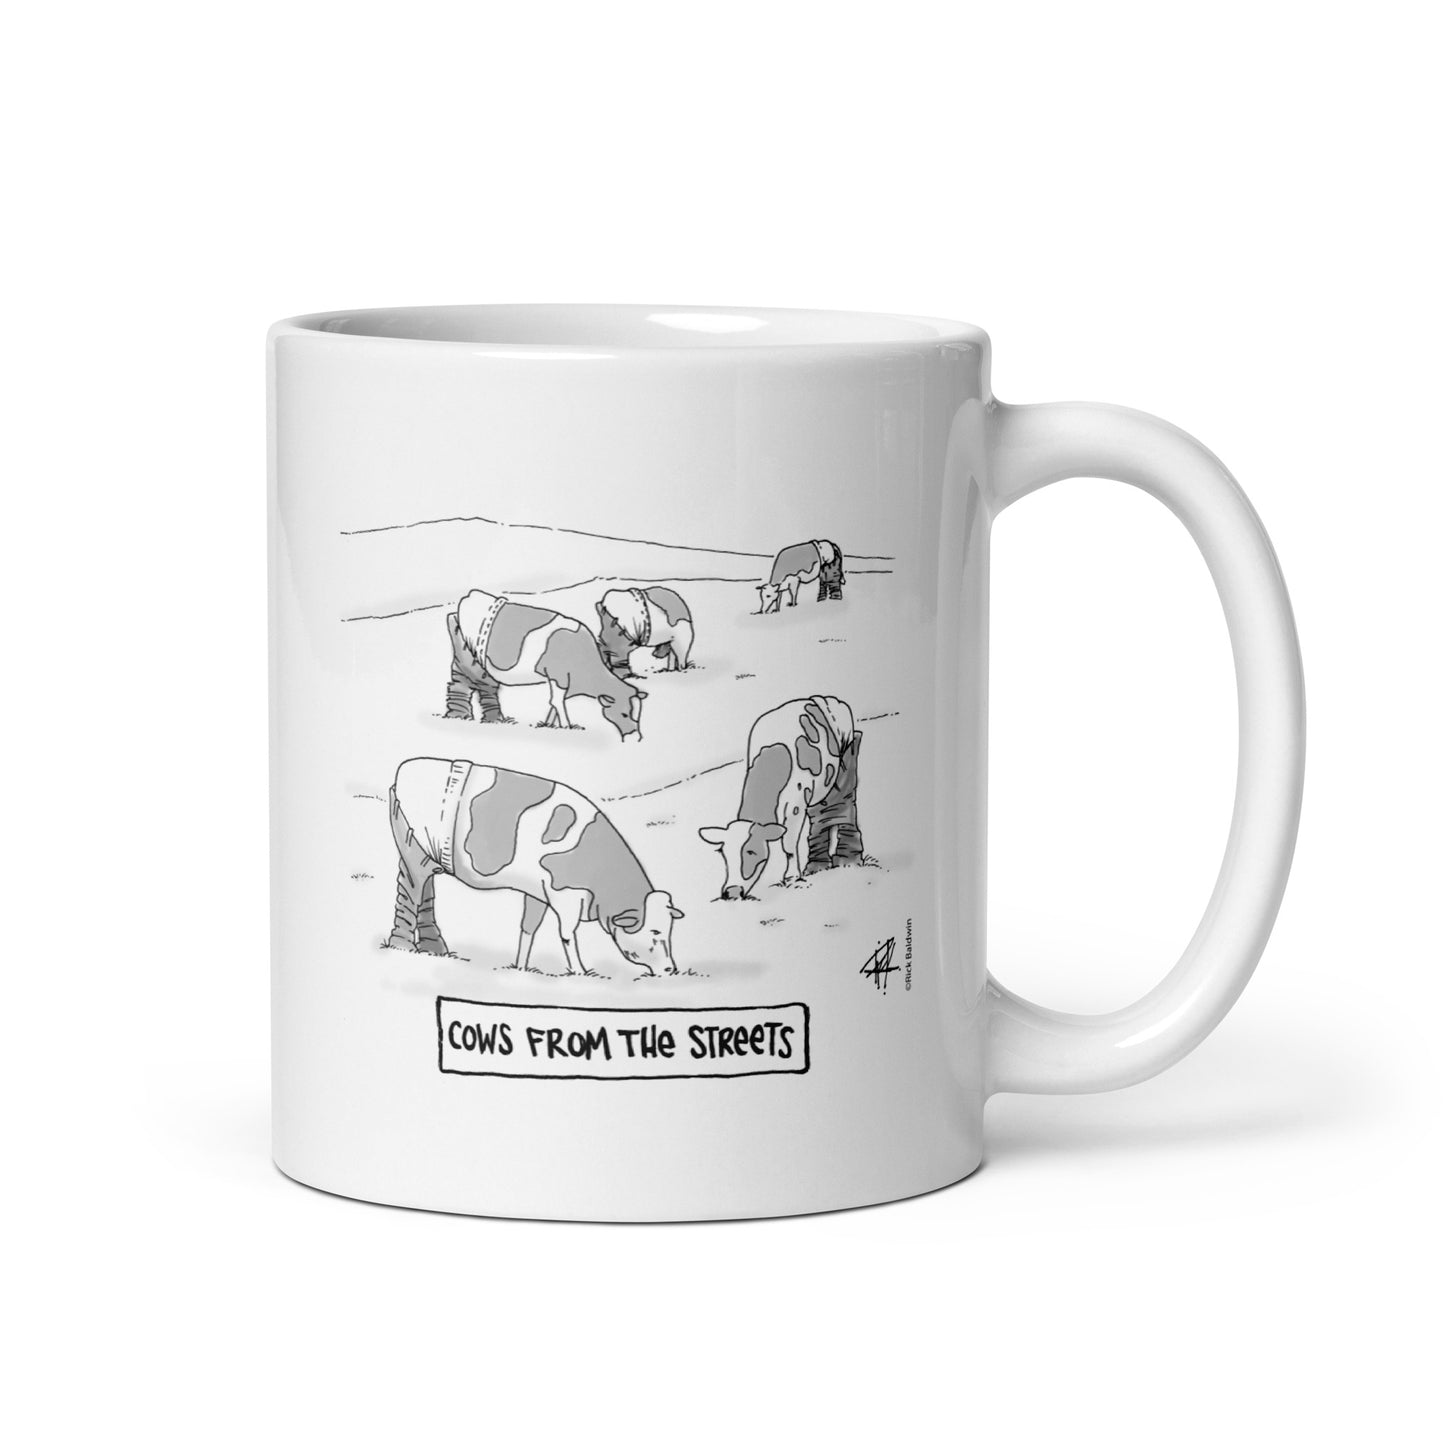 Cows From The Street - White Glossy Mug by RICK BALDWIN